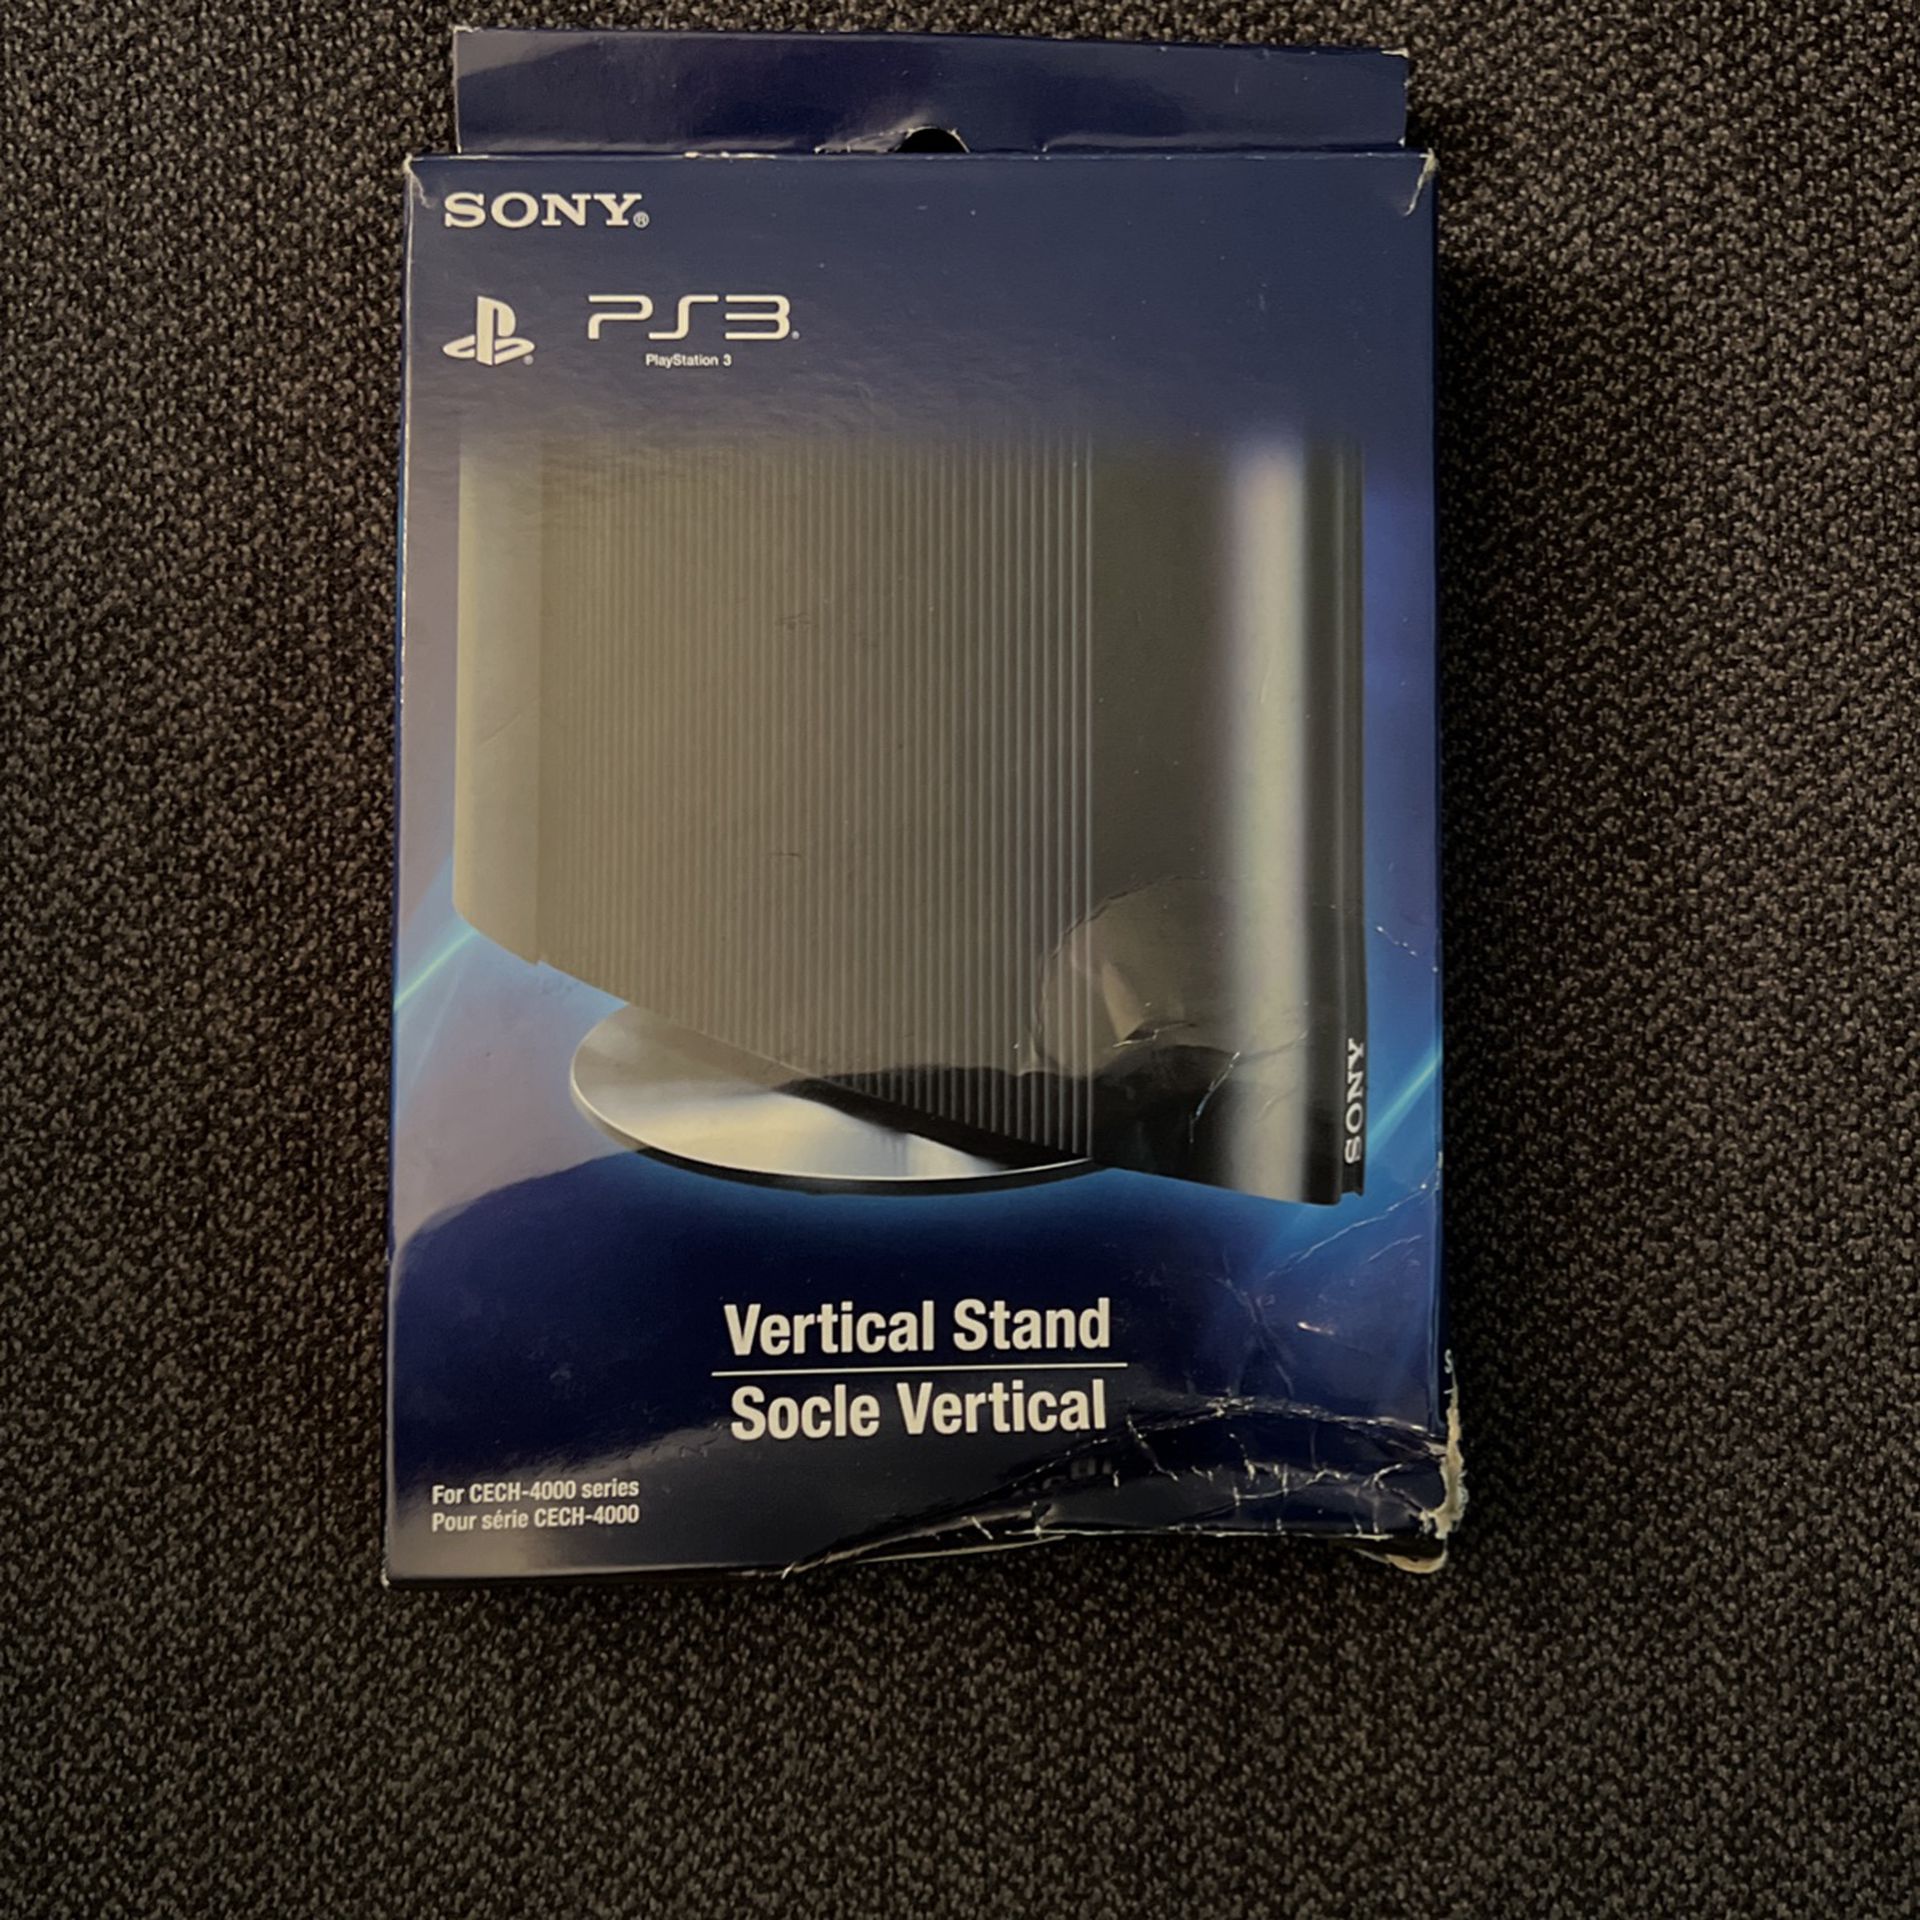 PS3 Vertical Stand In Box! 